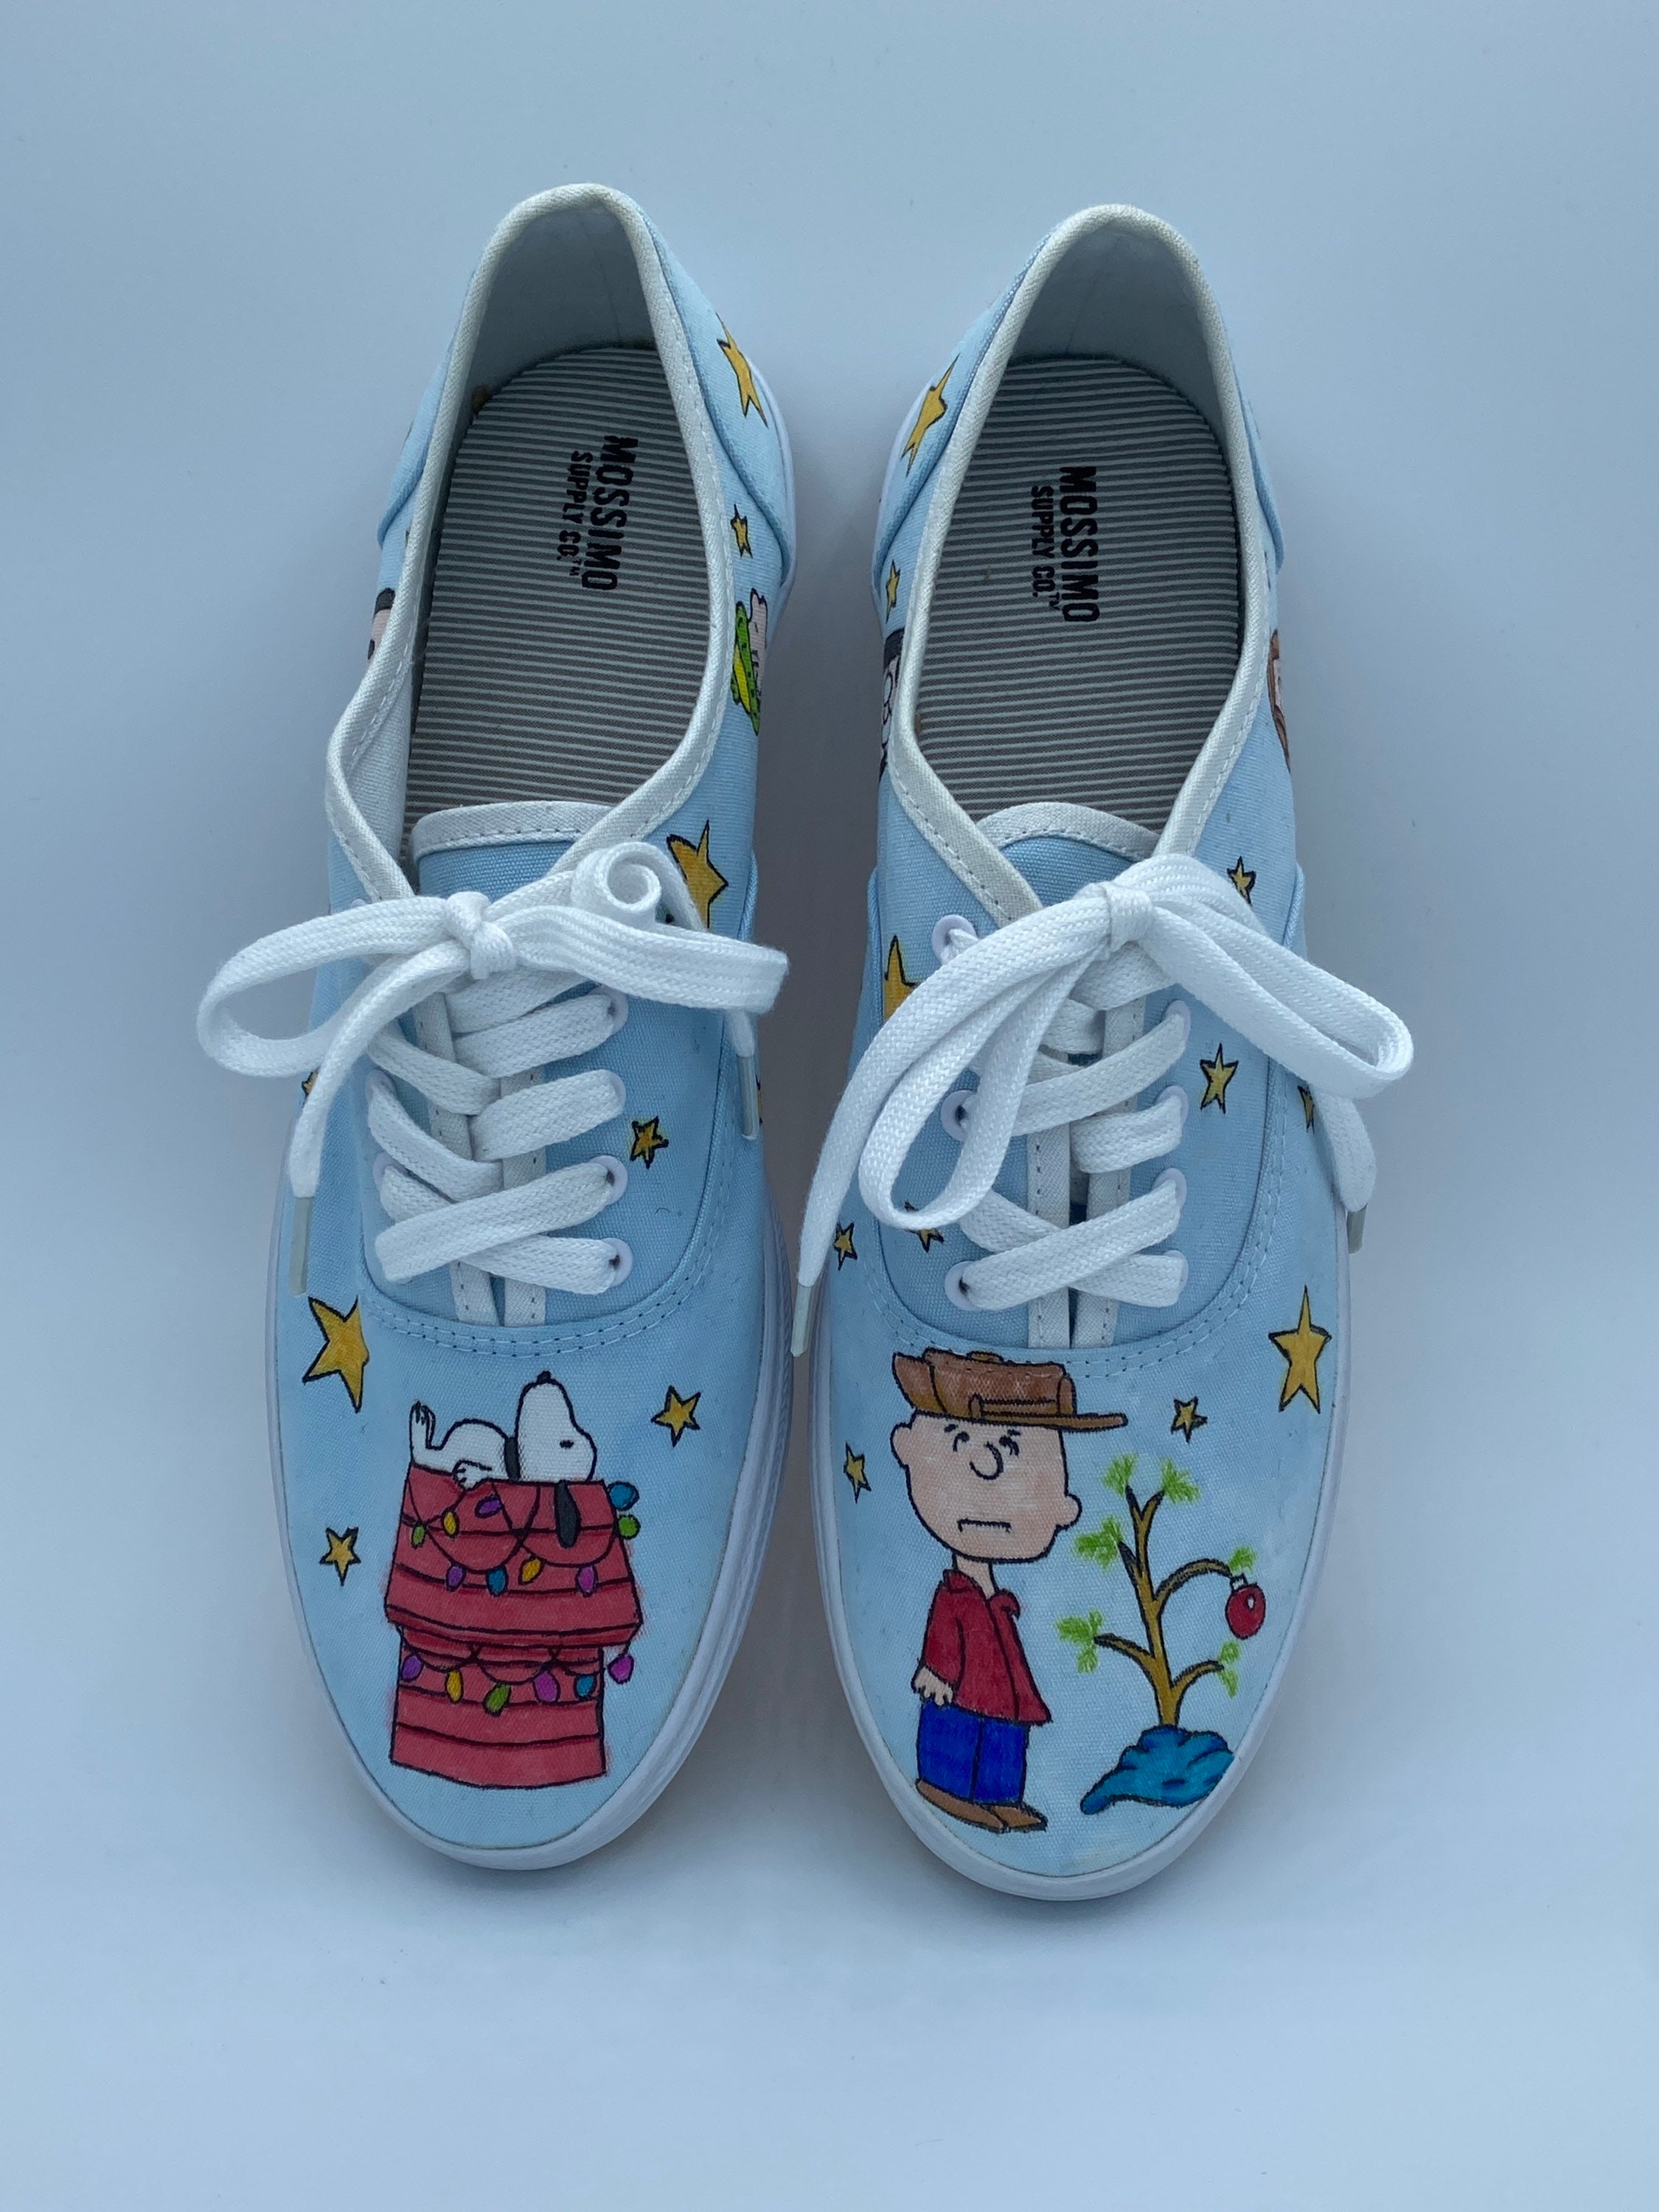 80+ Idea to Custom Painted your Vans Shoes